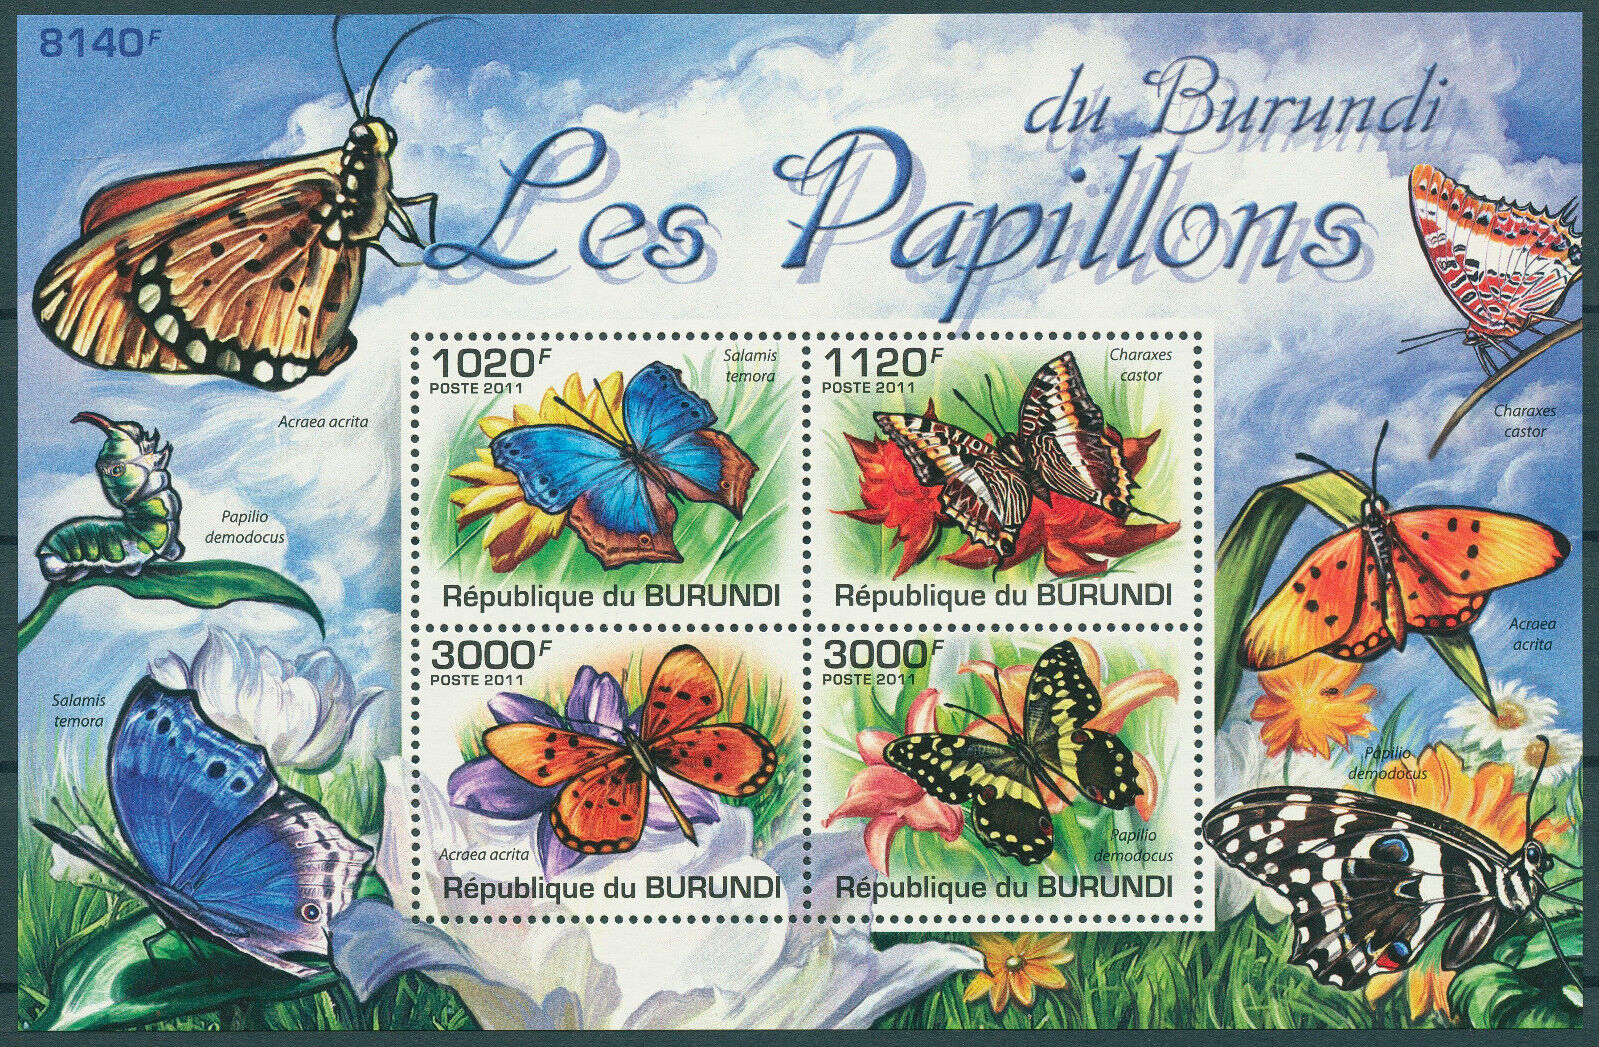 Burundi 2011 MNH Butterflies Stamps Swallowtail Charaxes Butterfly 4v M/S